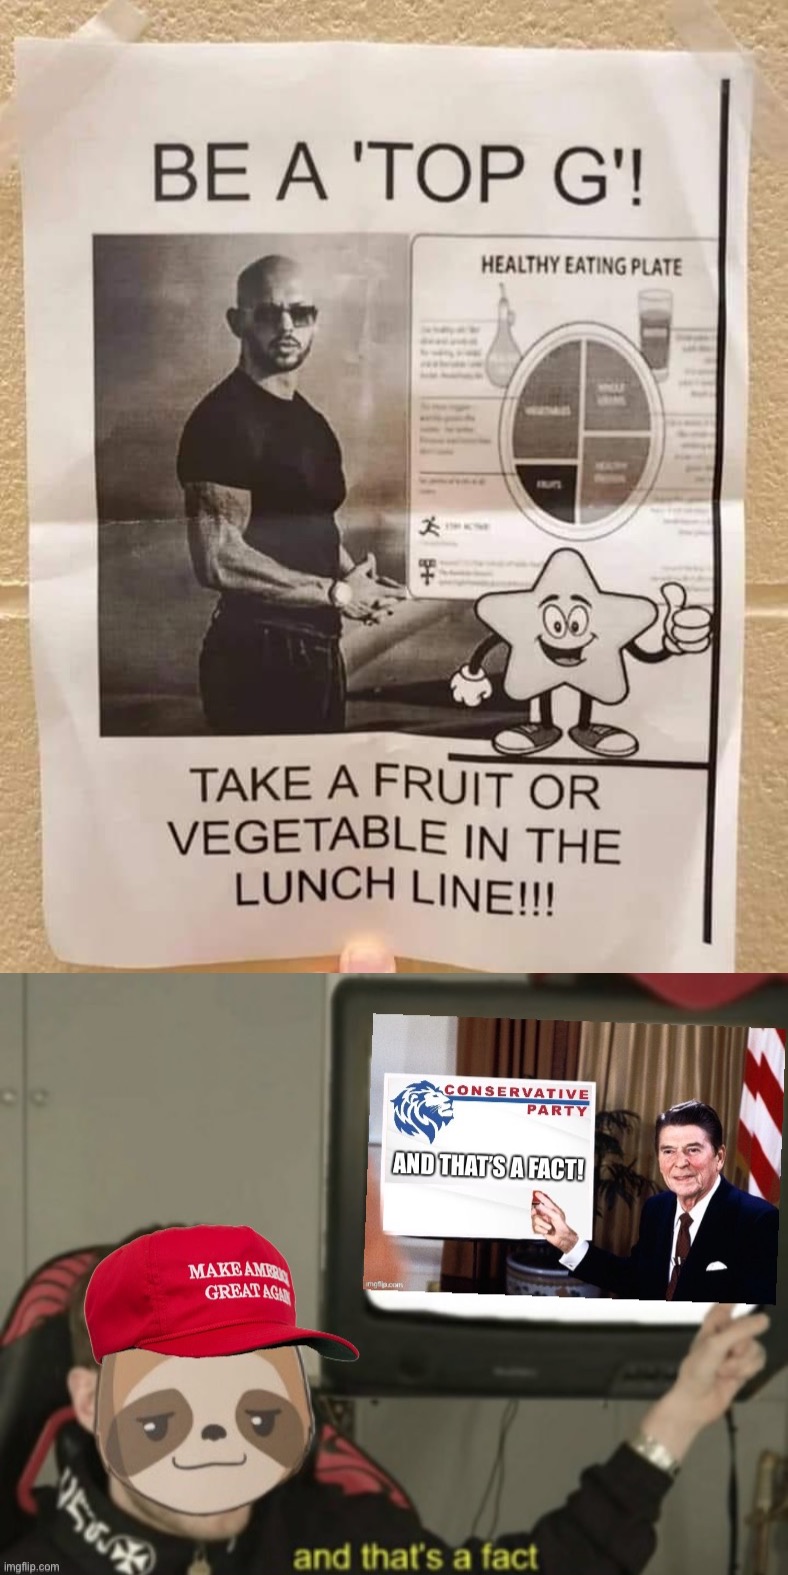 The Left wants you to be a fat slug in your mom’s basement. Real alphas know a great man is made in the kitchen. #fruit #veggie | image tagged in be a top g take a fruit or vegetable,maga sloth conservative party and that s a fact,psa,fruit,veggies,top g | made w/ Imgflip meme maker